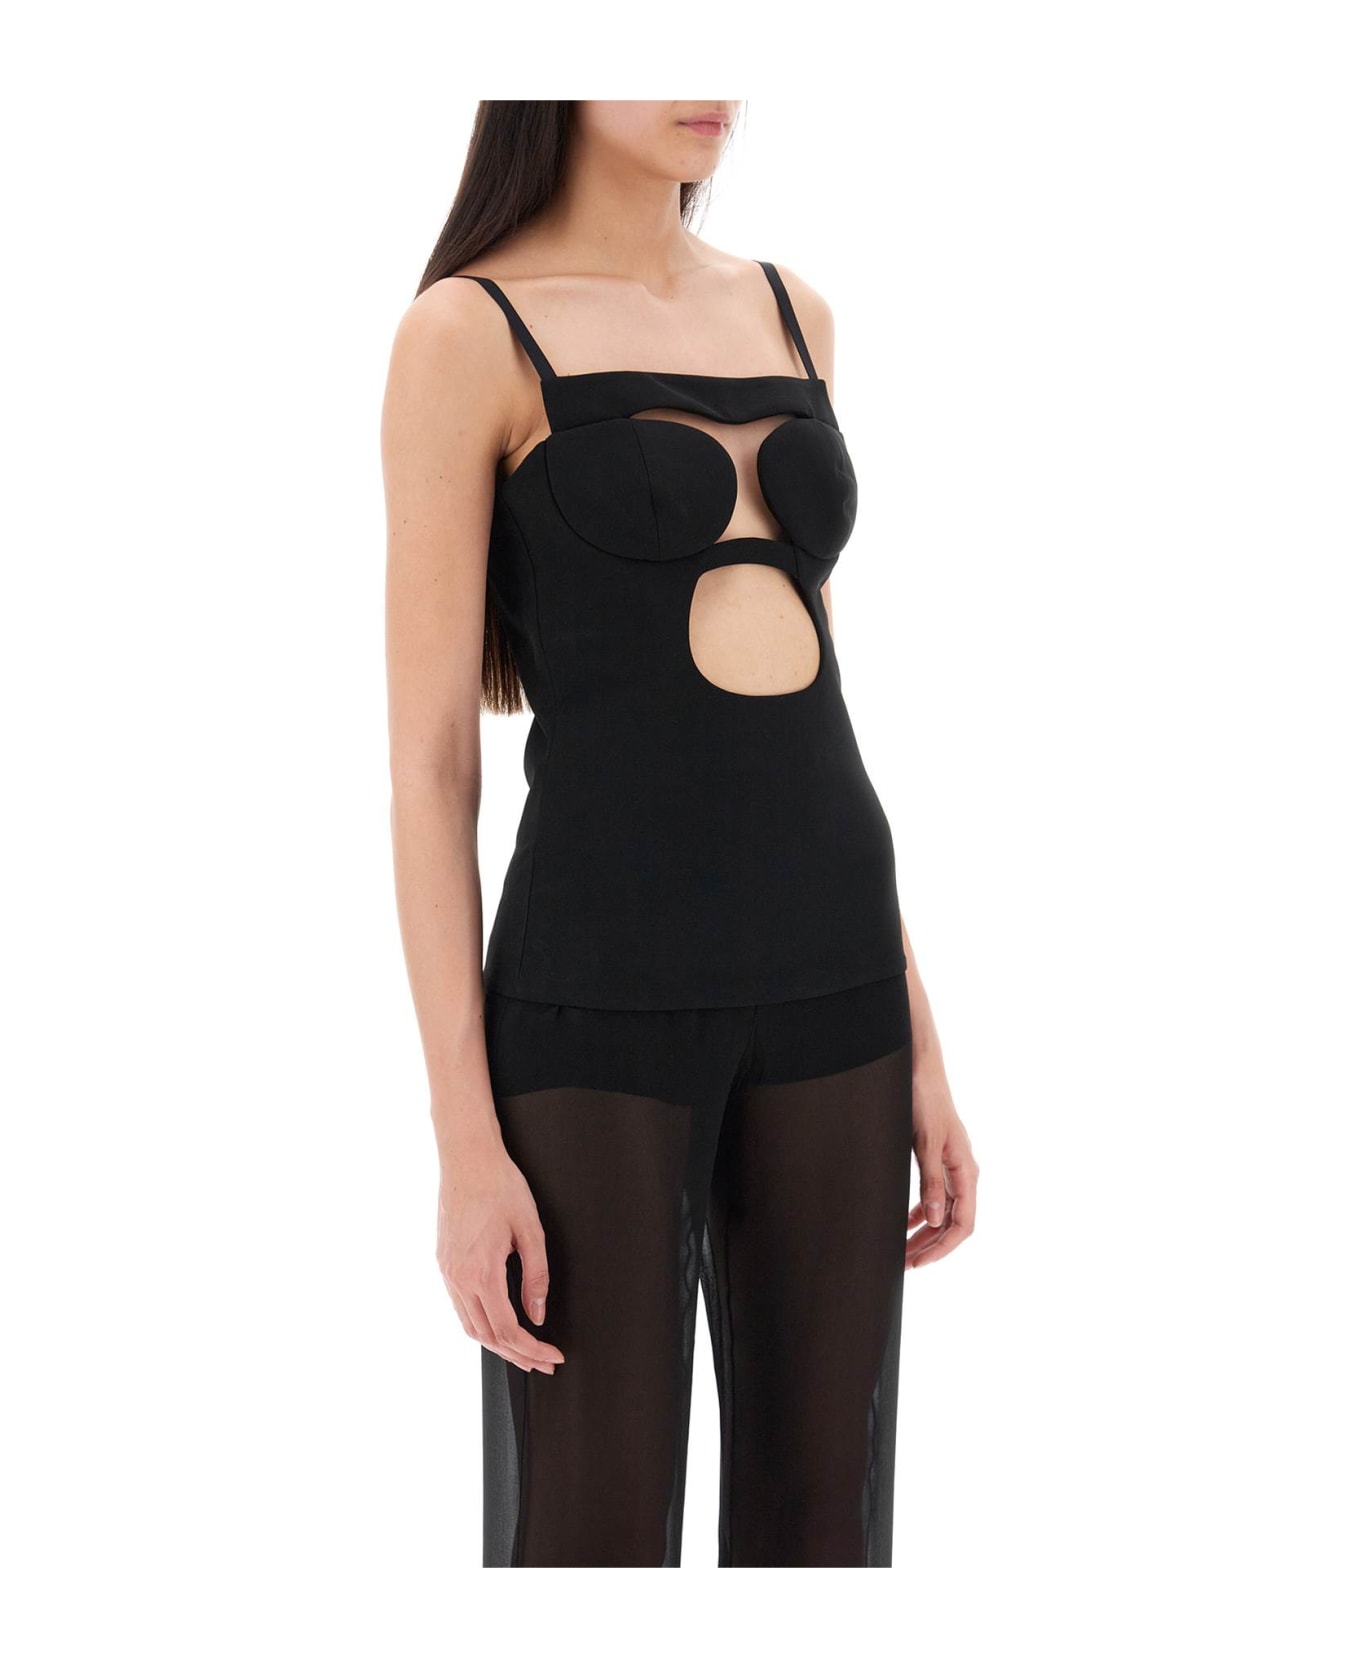 Nensi Dojaka Cut-out Top With Padded Cup - BLACK (Black)